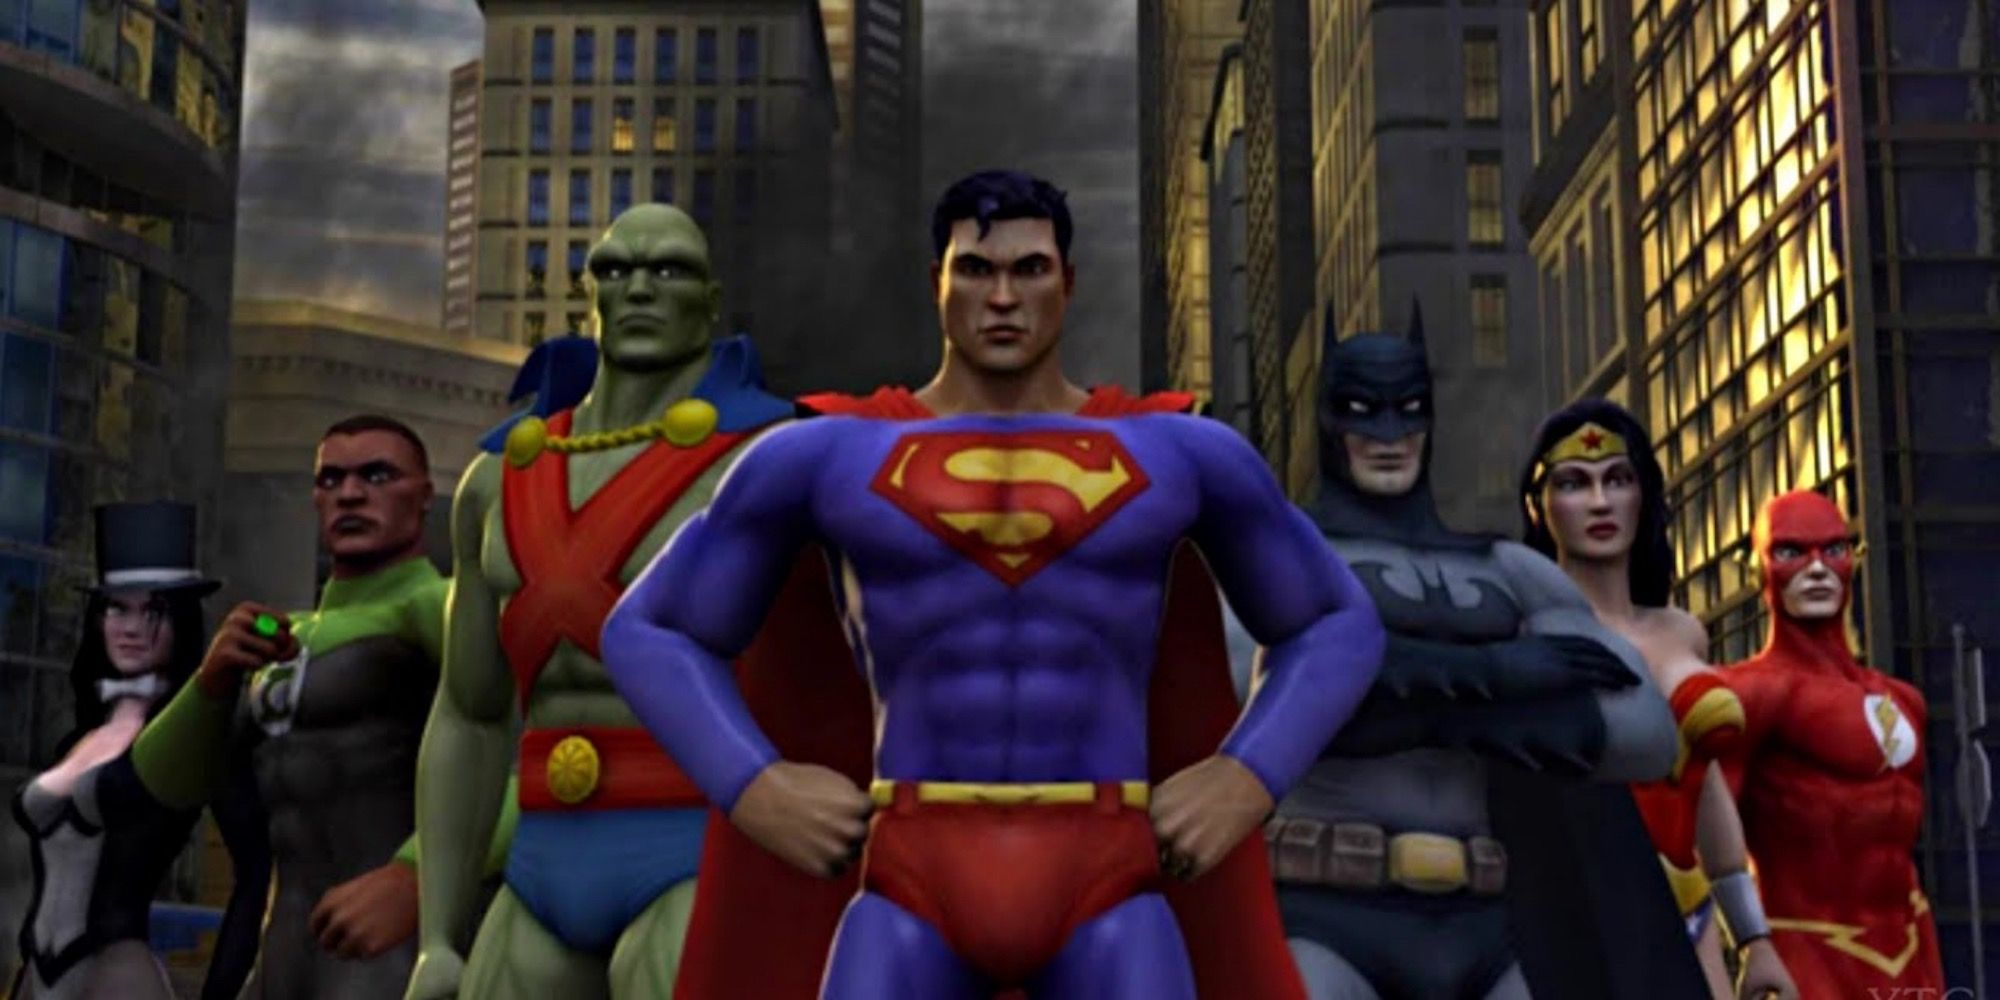 A scene featuring characters in Justice League Heroes